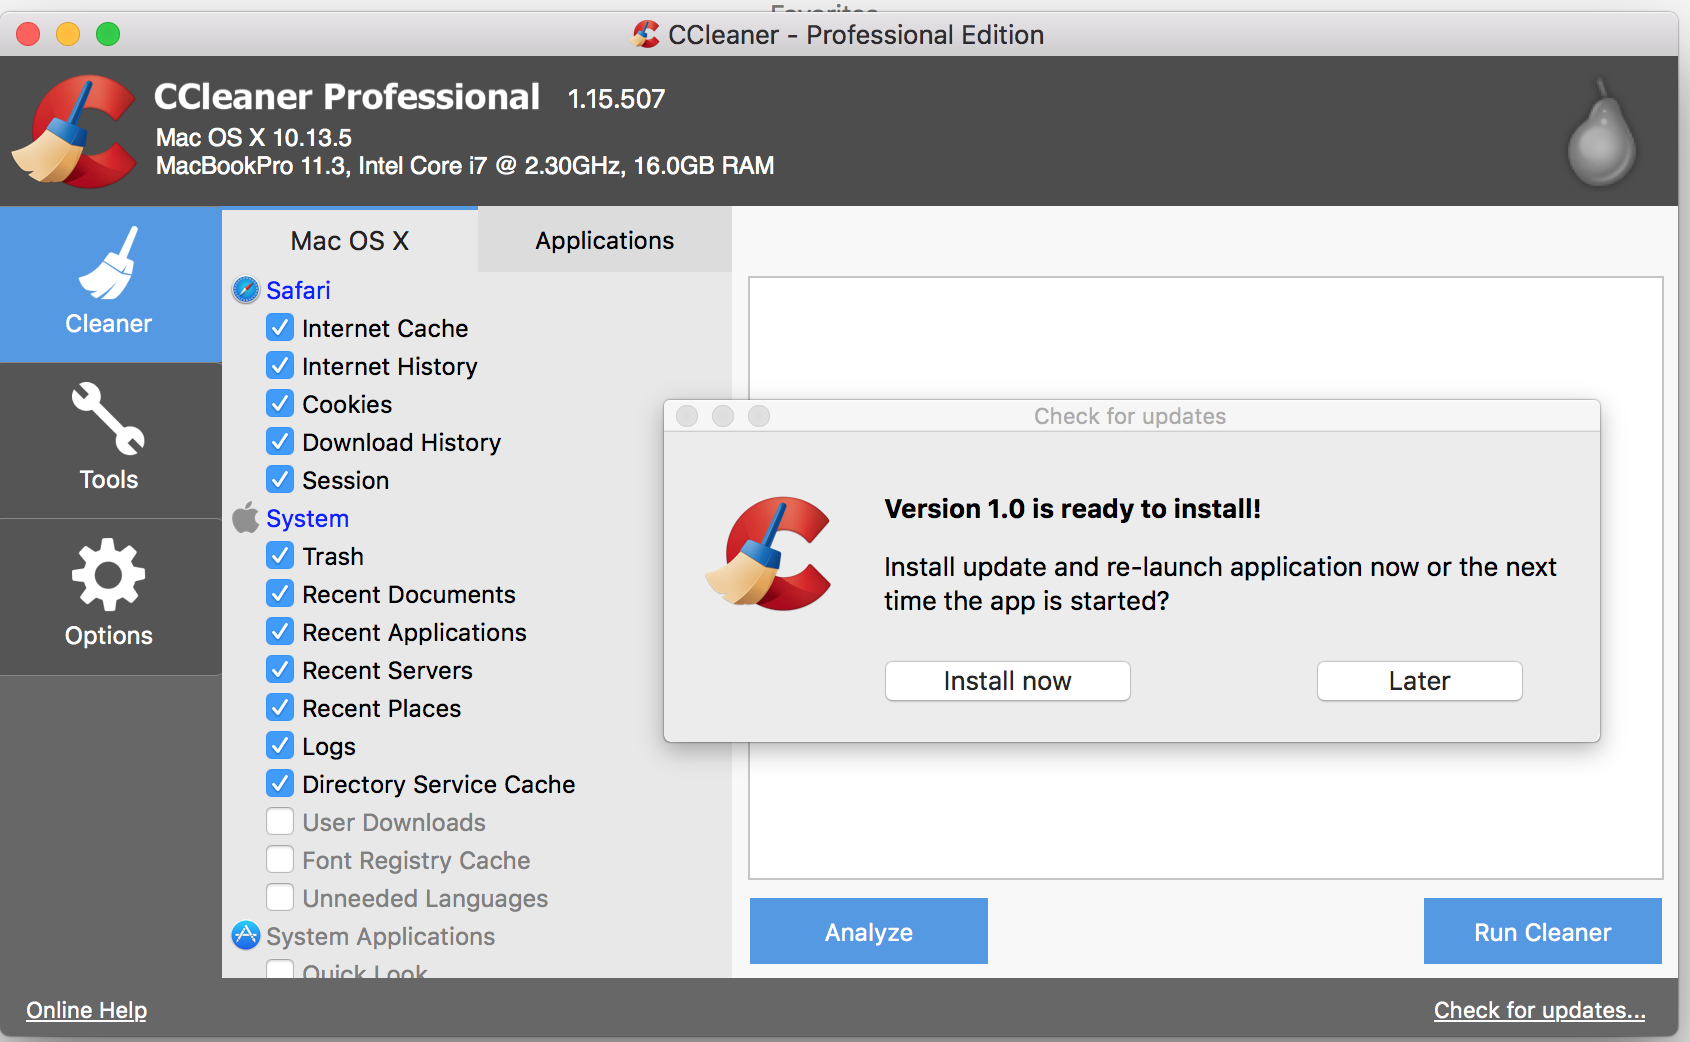 CCleaner Pro Key Full Working To Register CCleaner Professional Plus Key Active lifetime (07/2022) - Product Key Latest 2022 | Windows - Microsoft Office